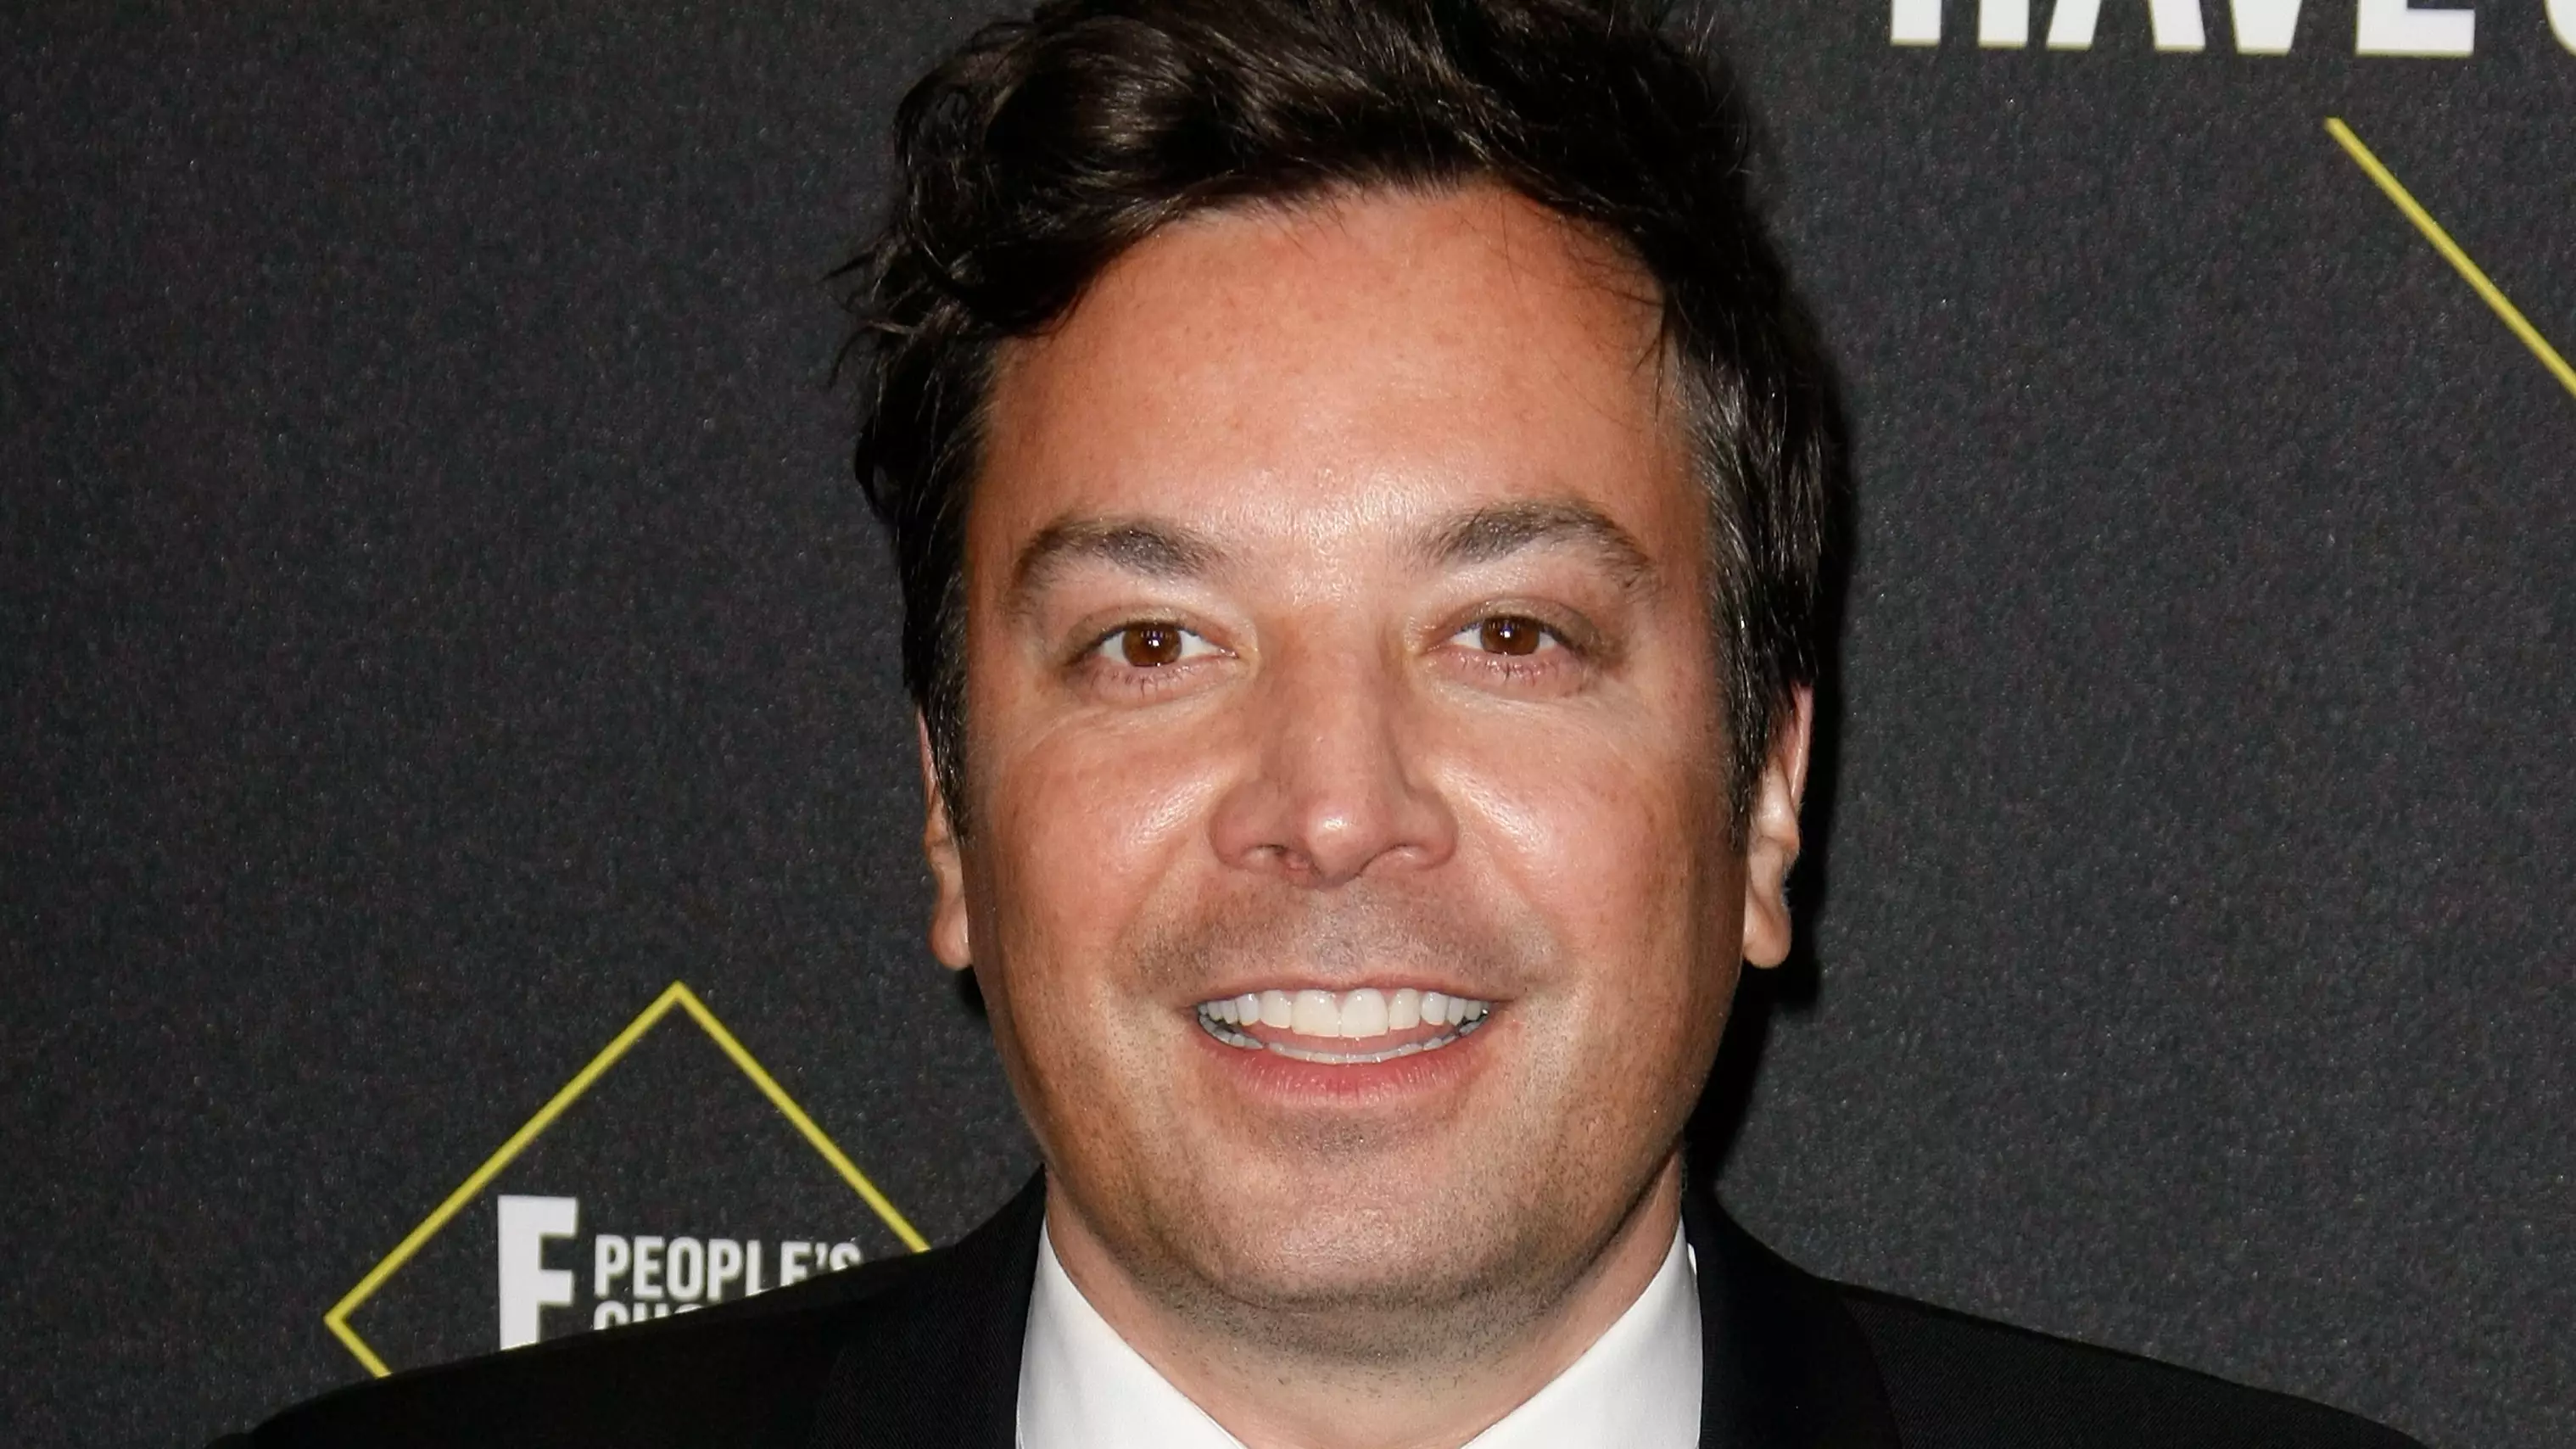 Jimmy Fallon Apologises For 'Unquestionably Offensive' Blackface Skit 20 Years Ago